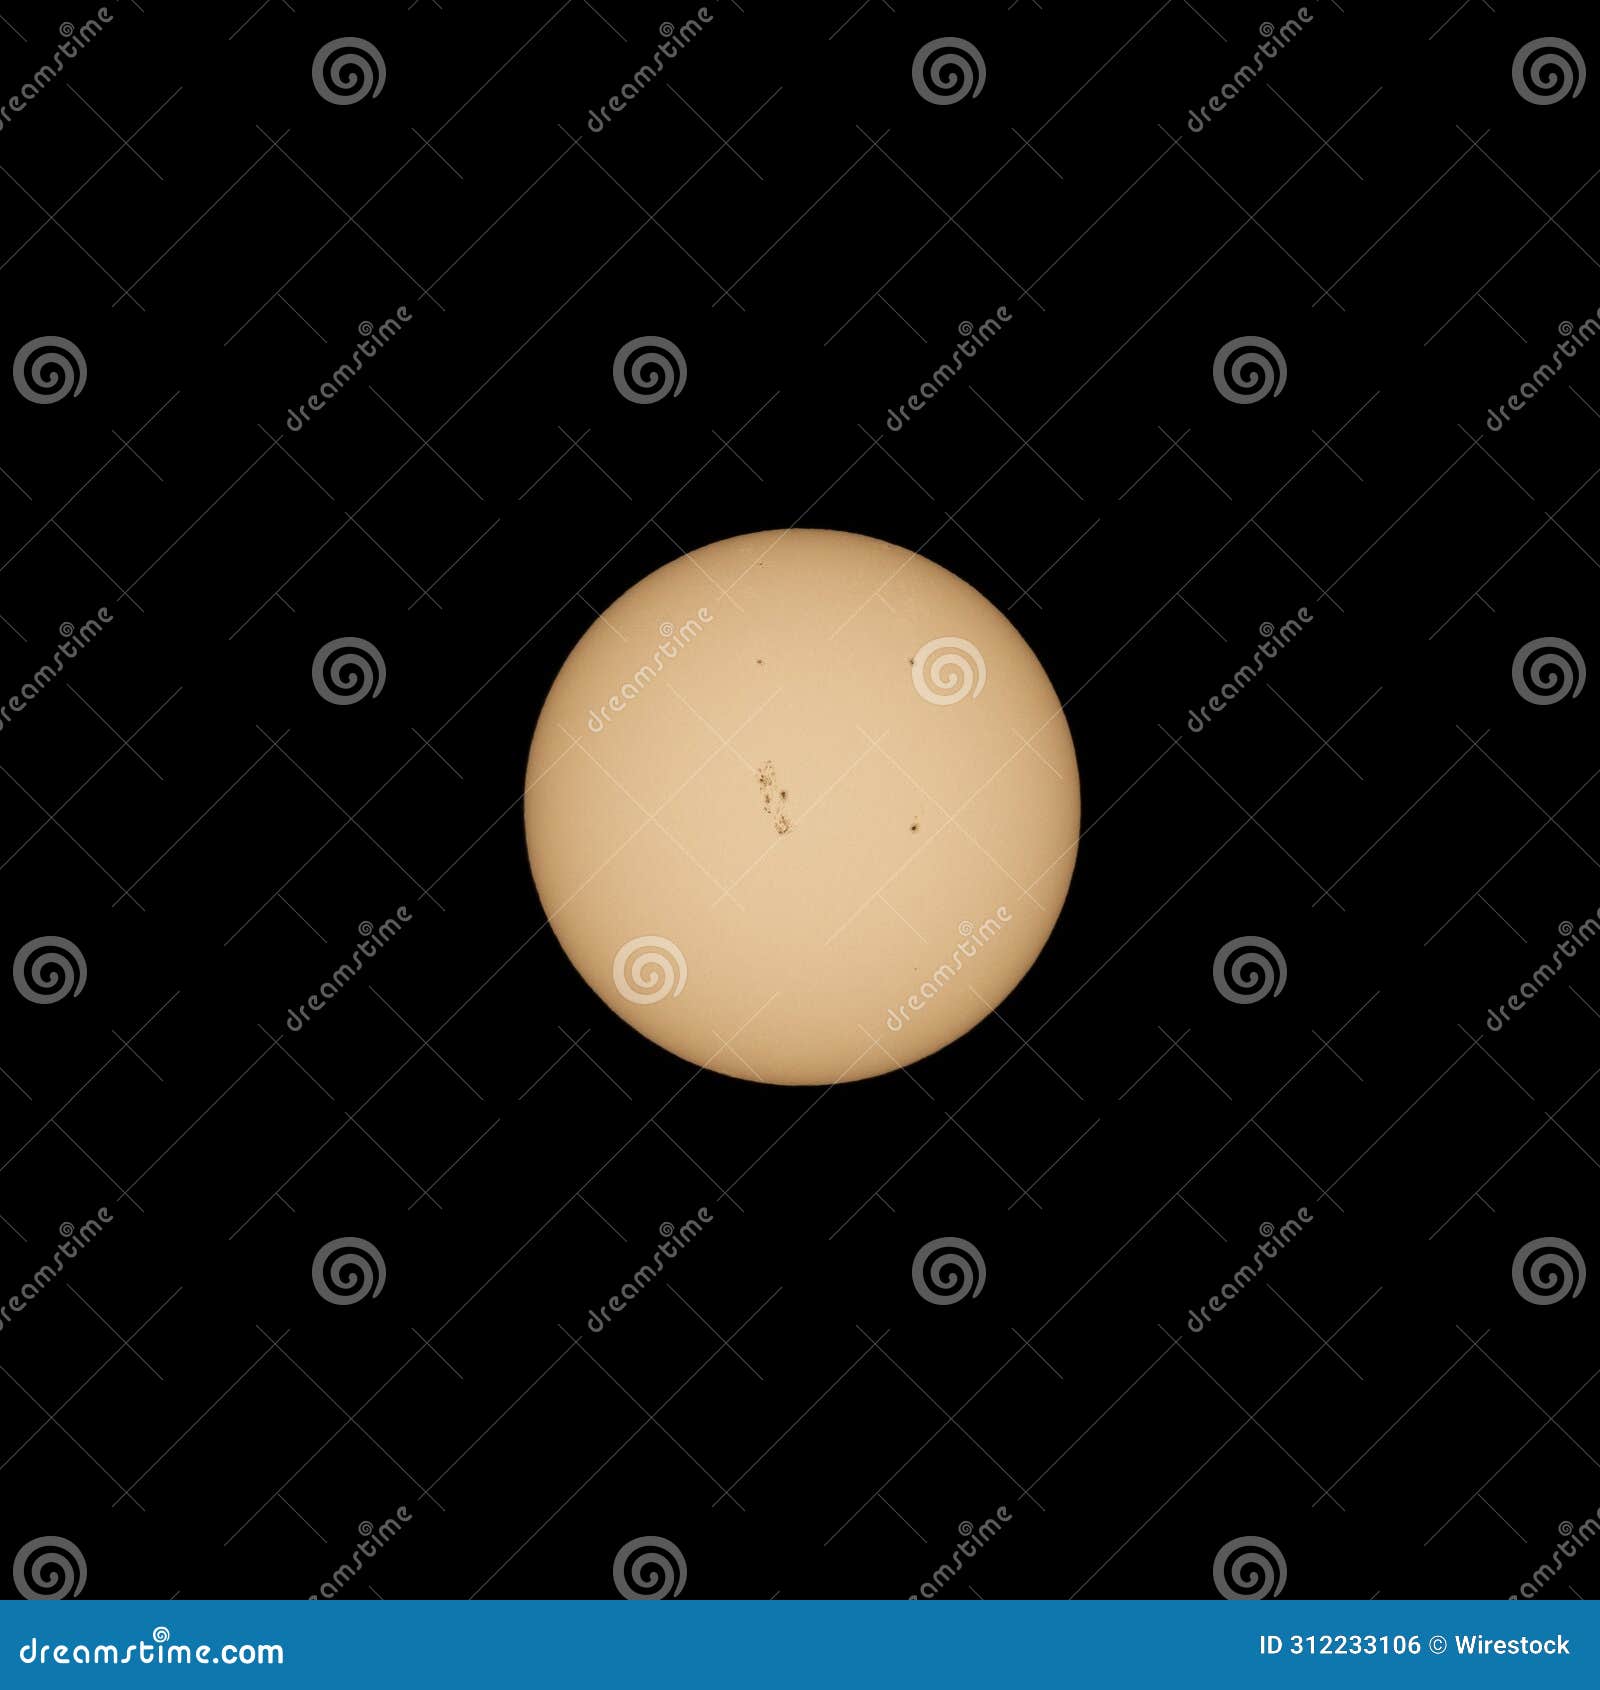 sunspots in march 23 on 2024